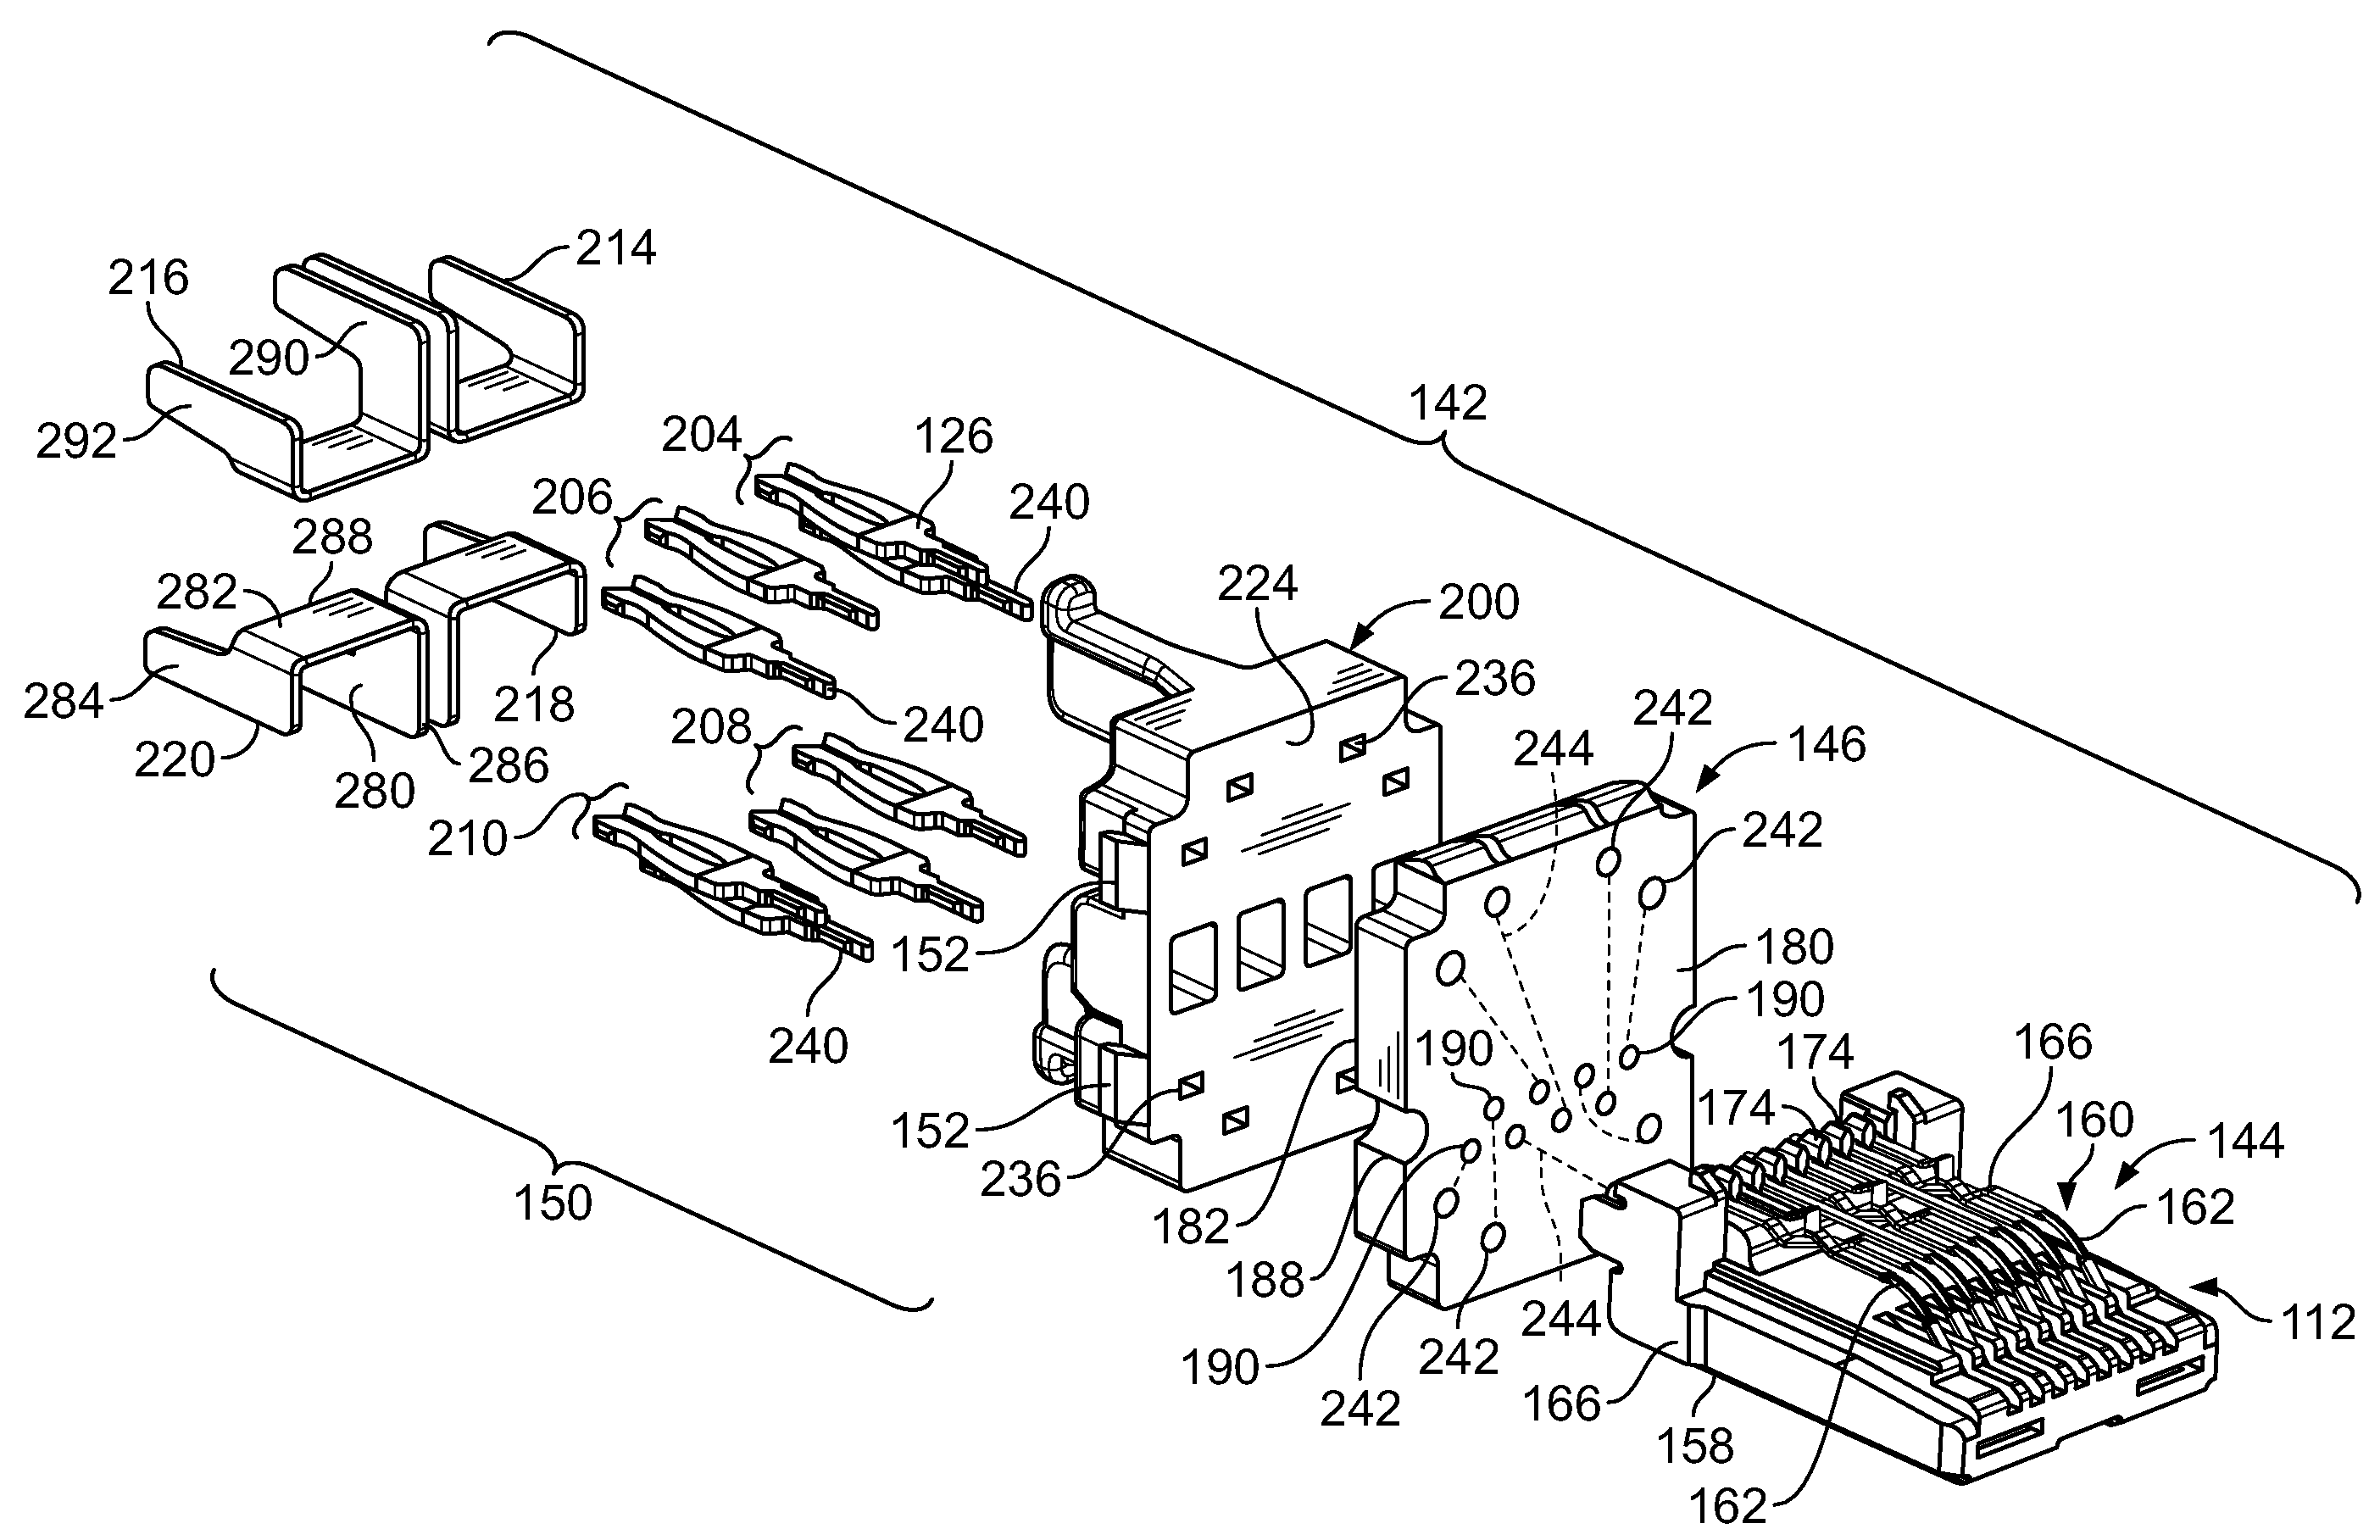 Electrical connector with enhanced back end design